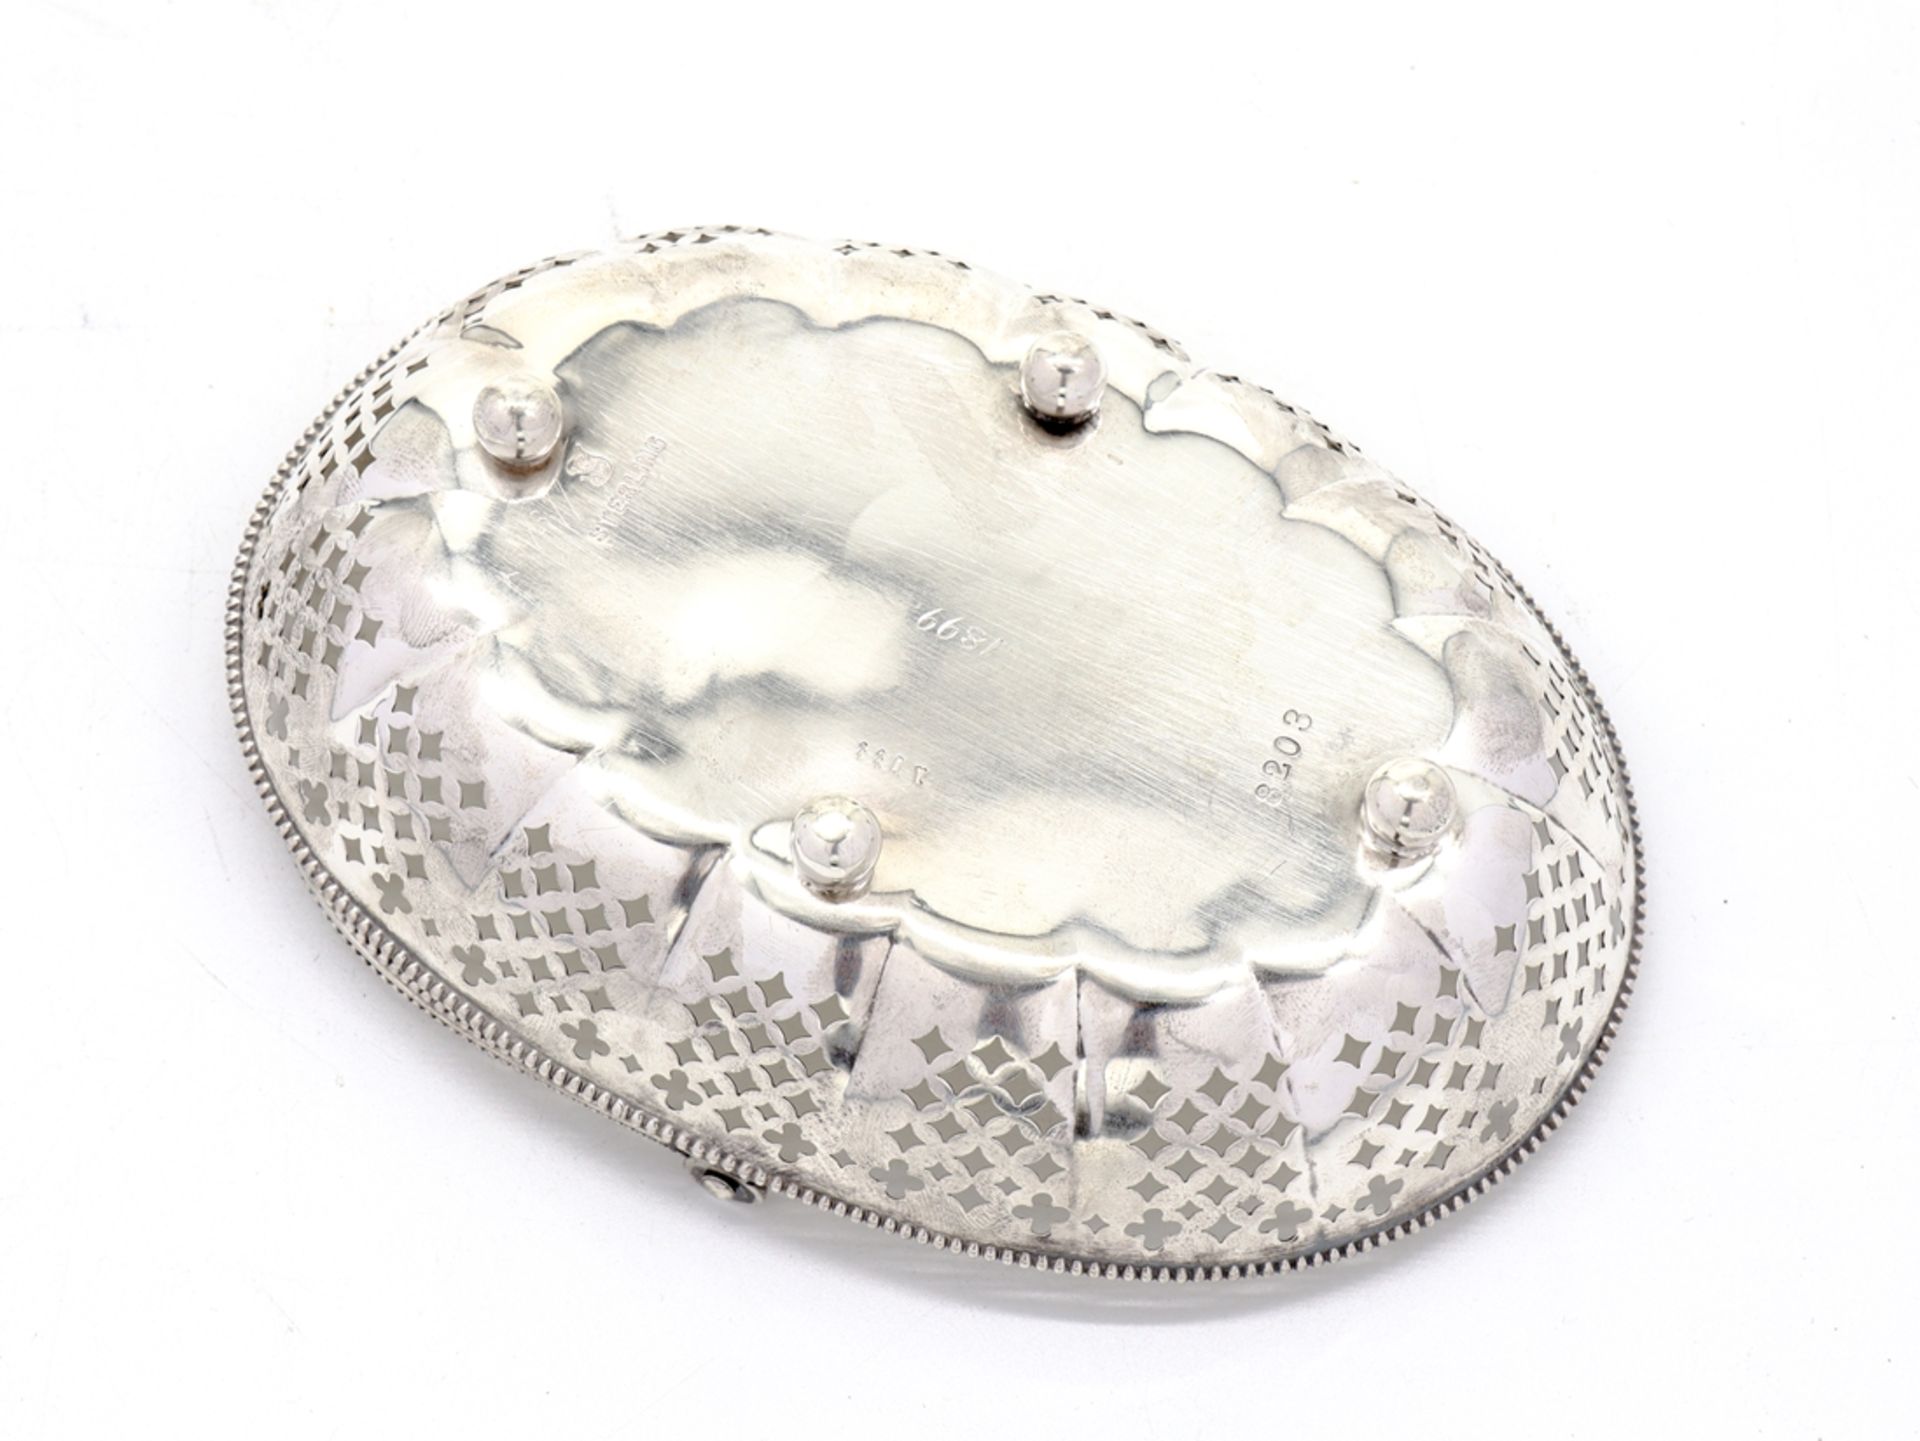 Handle basket, 925 sterling silver, dated 1899 - Image 5 of 7